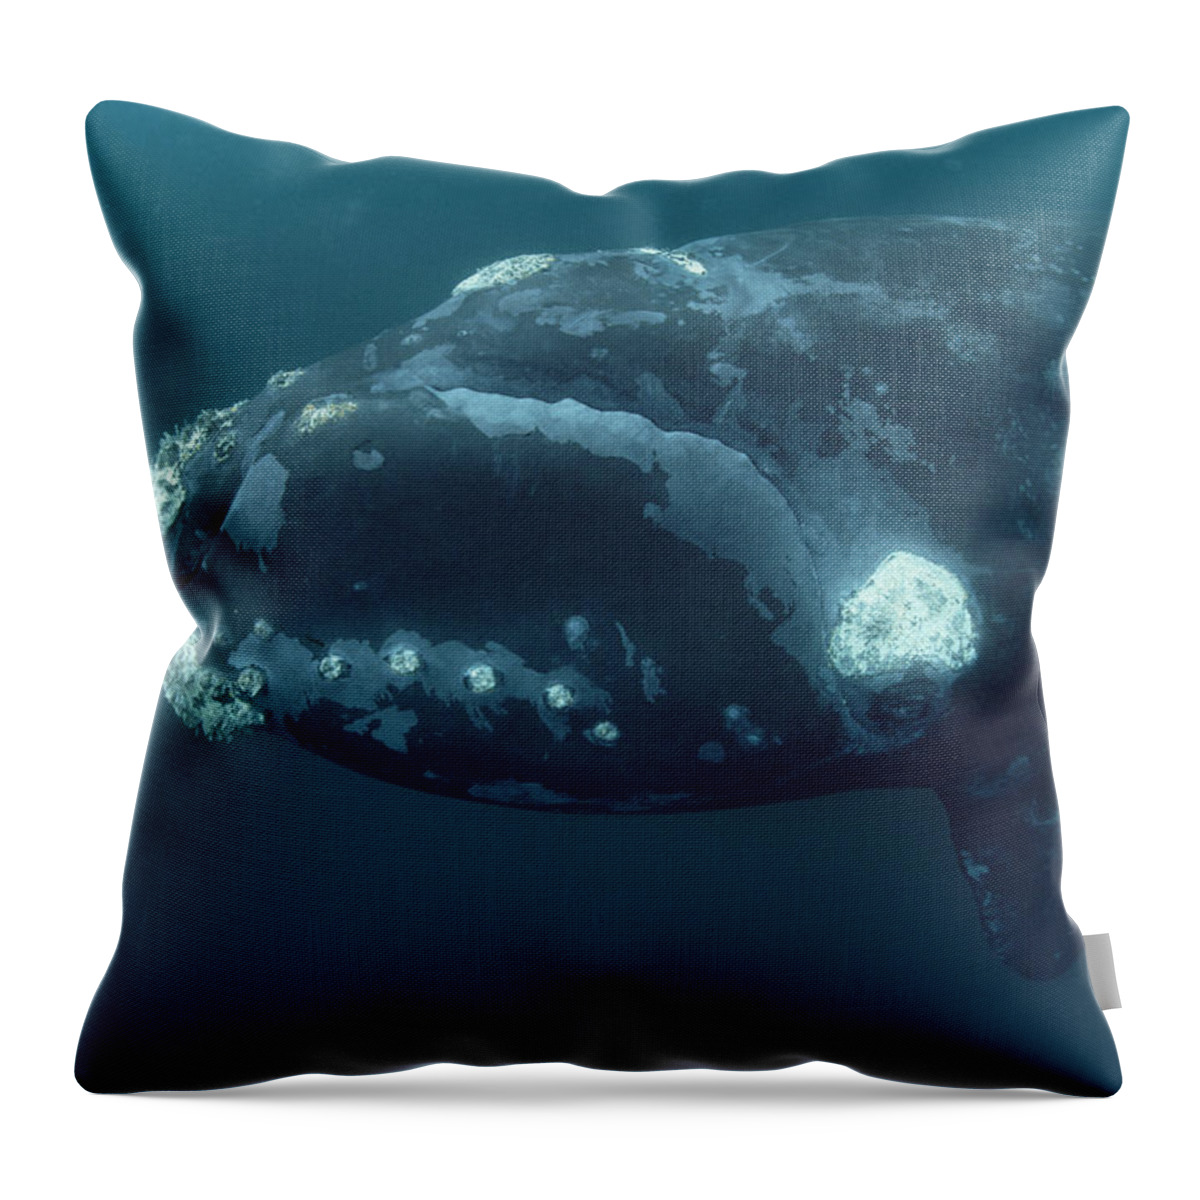 00083857 Throw Pillow featuring the photograph Southern Right Whale Under Boat by Flip Nicklin